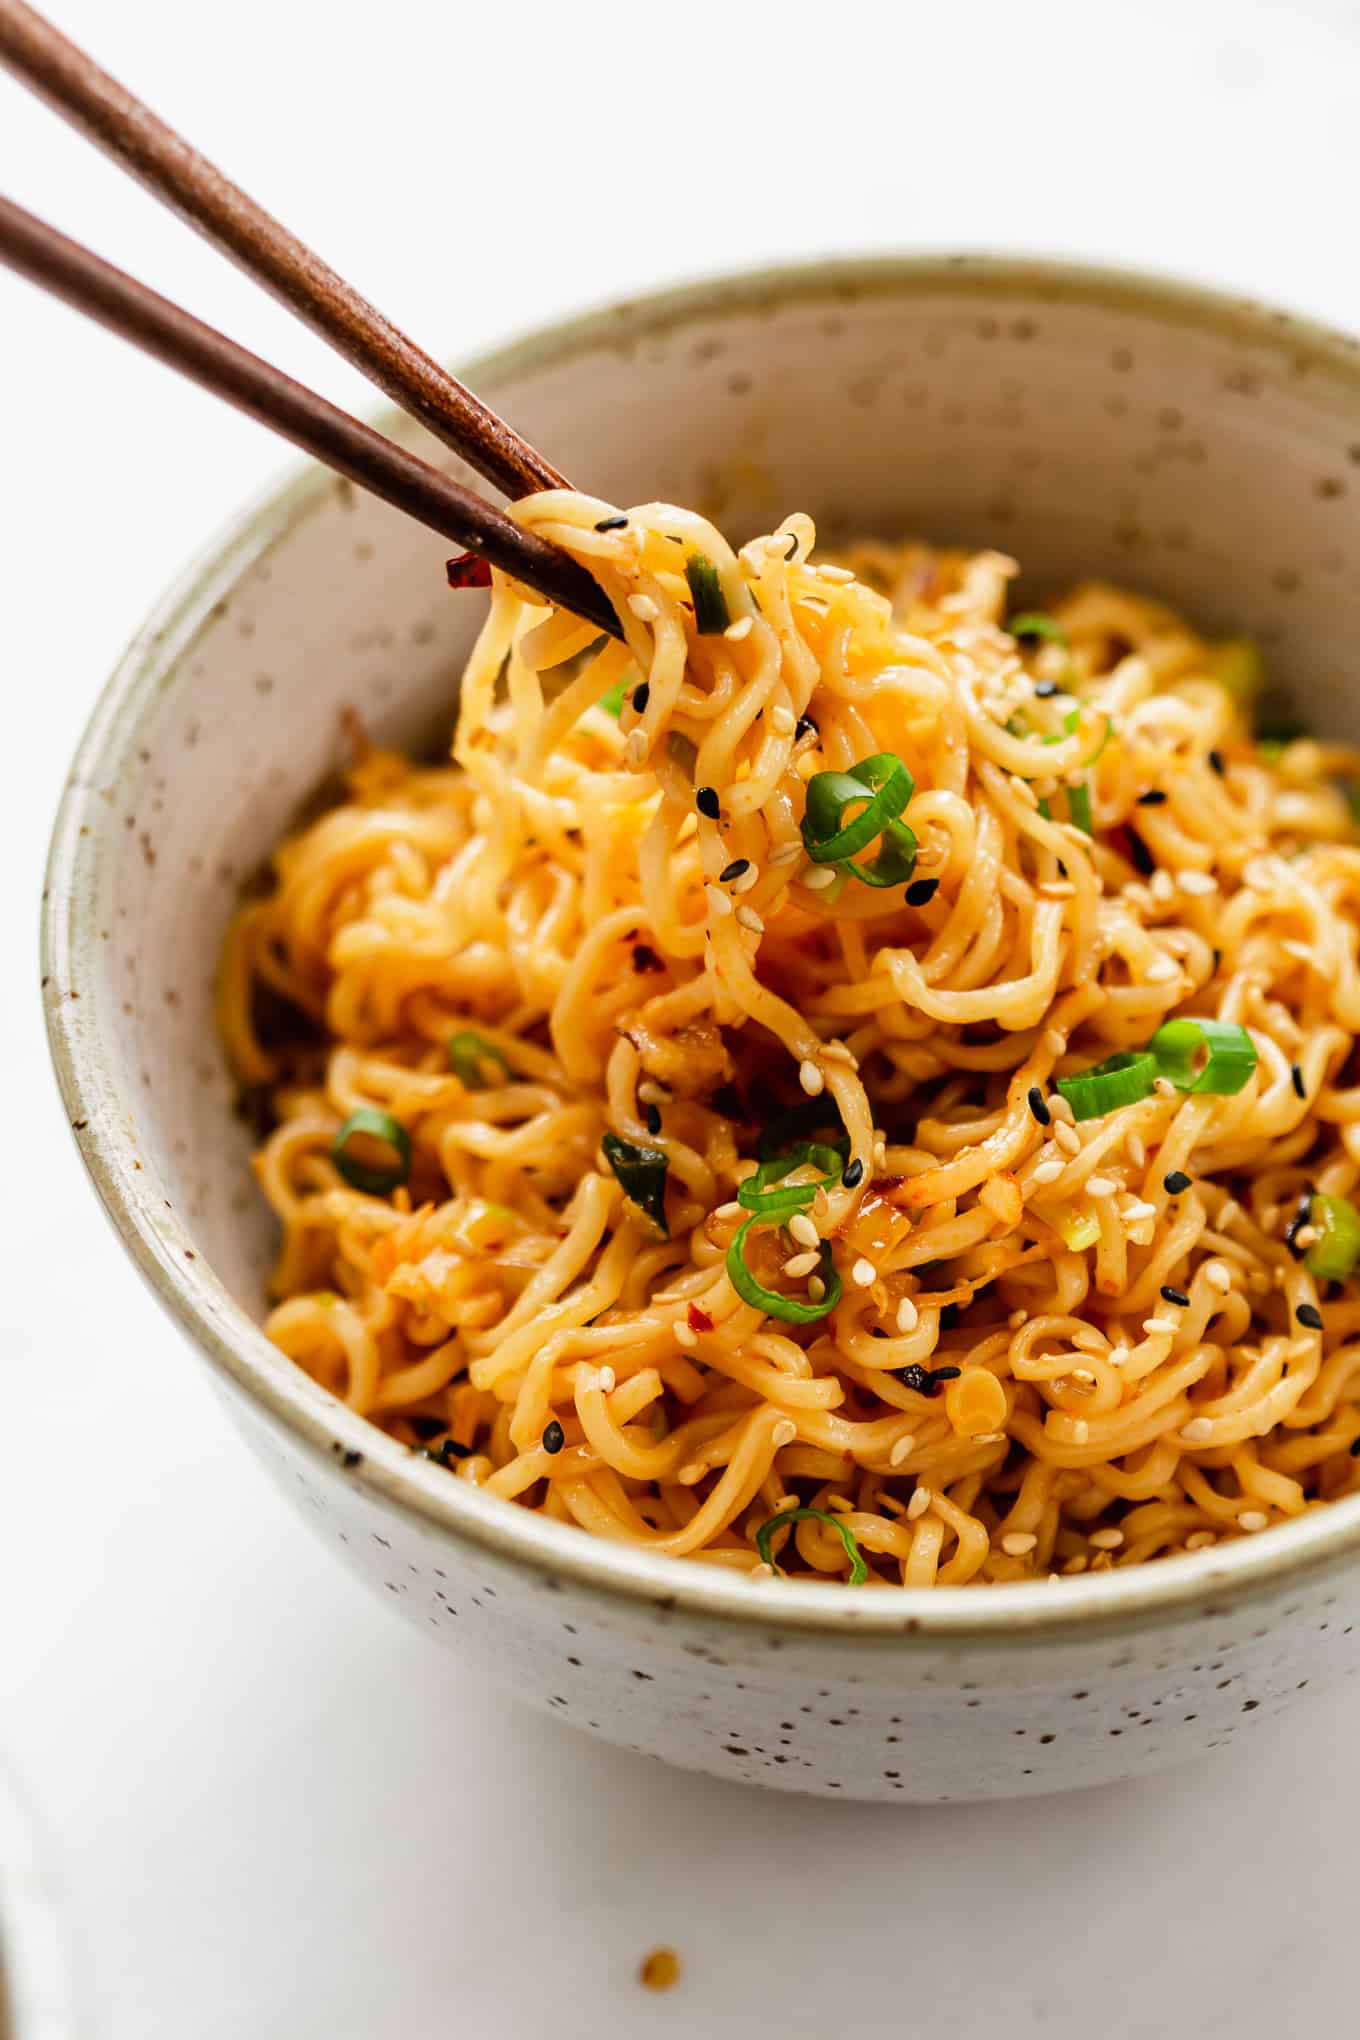 Spicy Chili OIl Noodles 9 